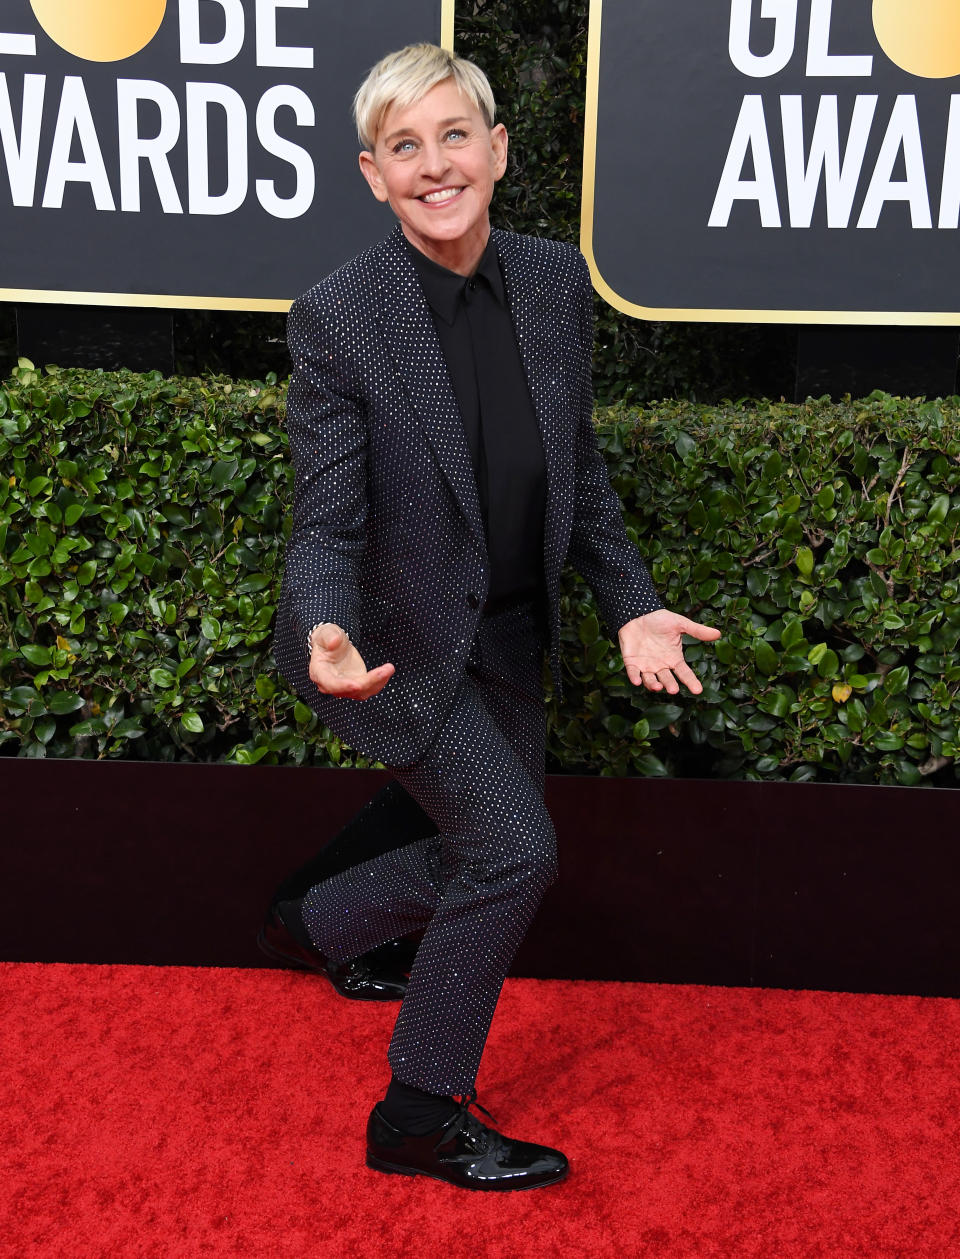 Ellen DeGeneres arrives at the 77th Annual Golden Globe Awards attends the 77th Annual Golden Globe Awards at The Beverly Hilton Hotel on January 05, 2020 in Beverly Hills, California. (Photo by Steve Granitz/WireImage)